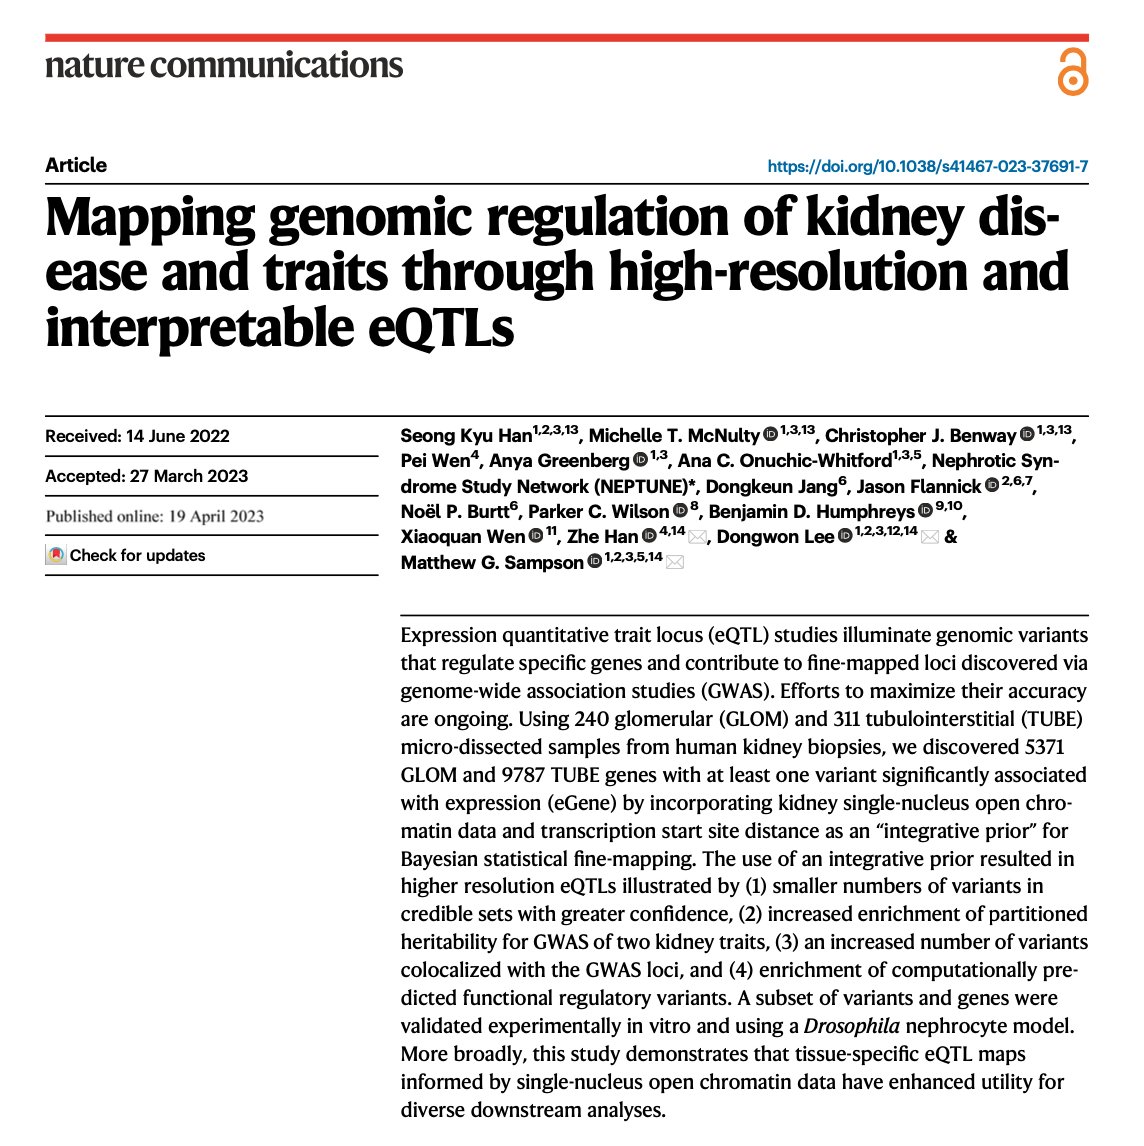 Our paper on 'Mapping genomic regulation of kidney disease and traits through high-resolution and interpretable eQTLs' is published! Congrats @m_t_mcnulty @han_seongkyu @cbenway @AnyaDGreenberg @dongwon_lee @kidneyomicsamps @HumphreysLab @parkercwilson go.nature.com/3NiCygX